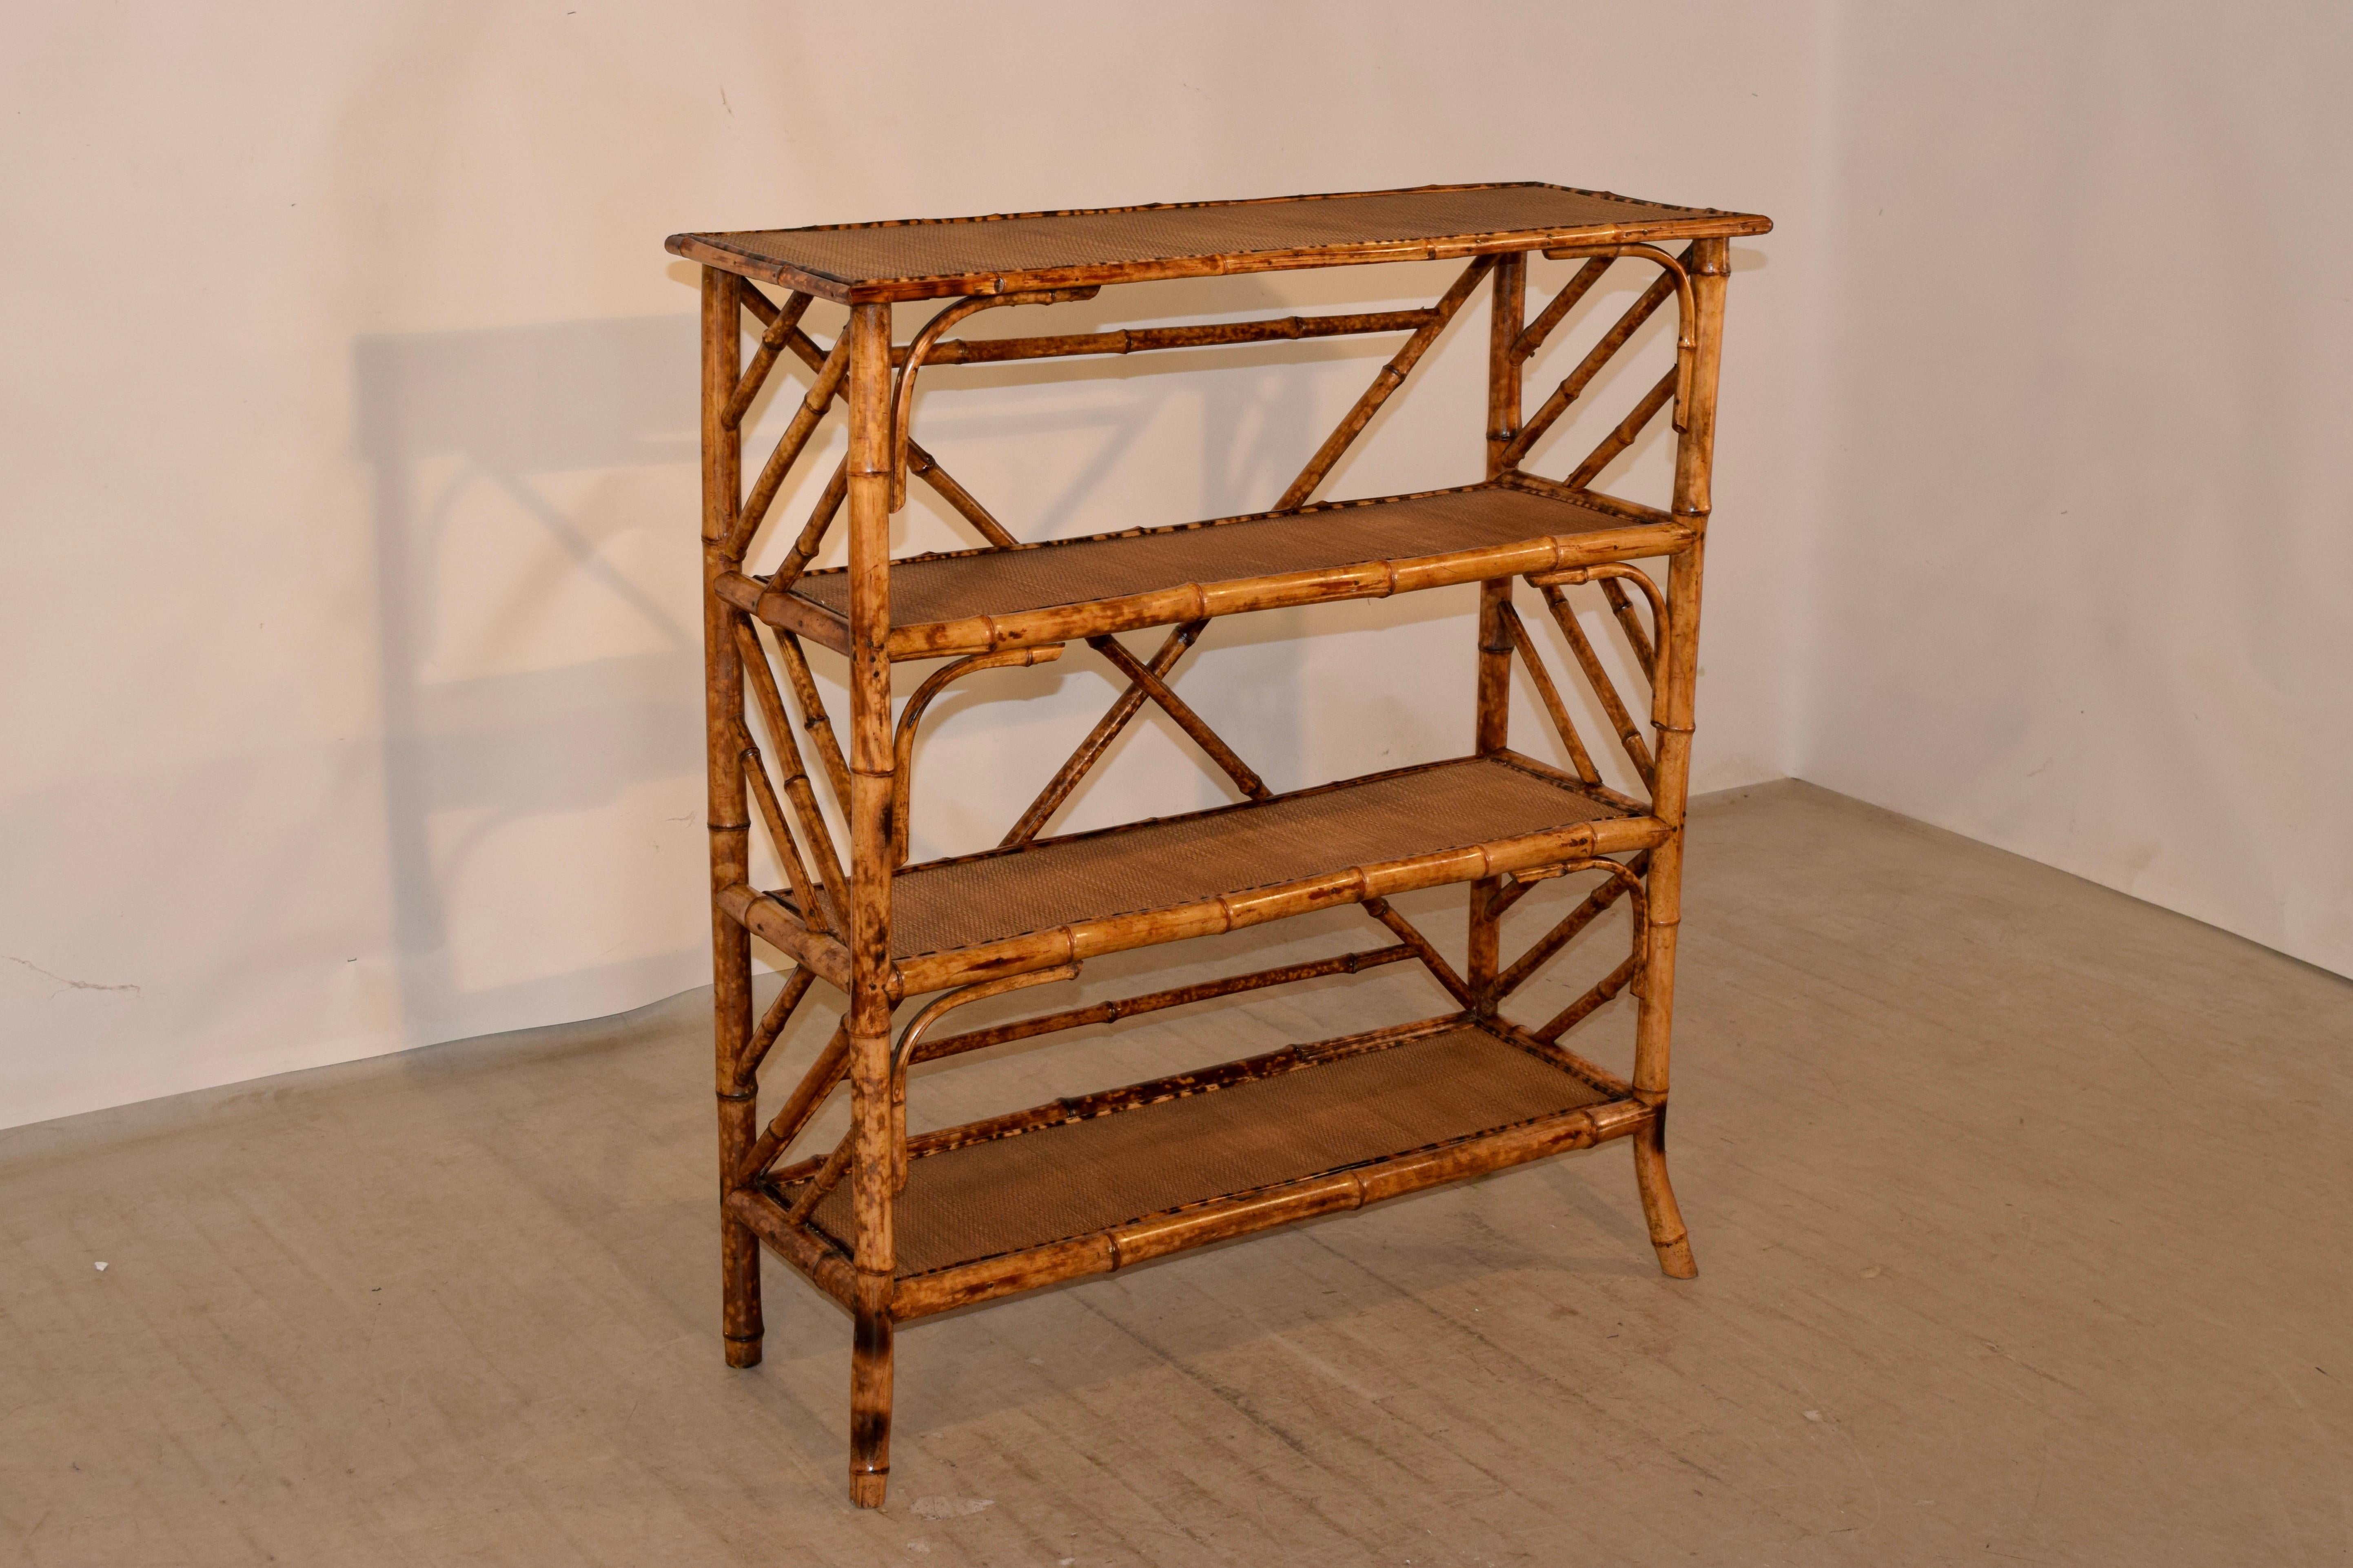 19th century bamboo bookcase from France with rush covered shelves and unusual decorative accents throughout. The front legs are splayed and the back legs straight for easy placement against a wall.